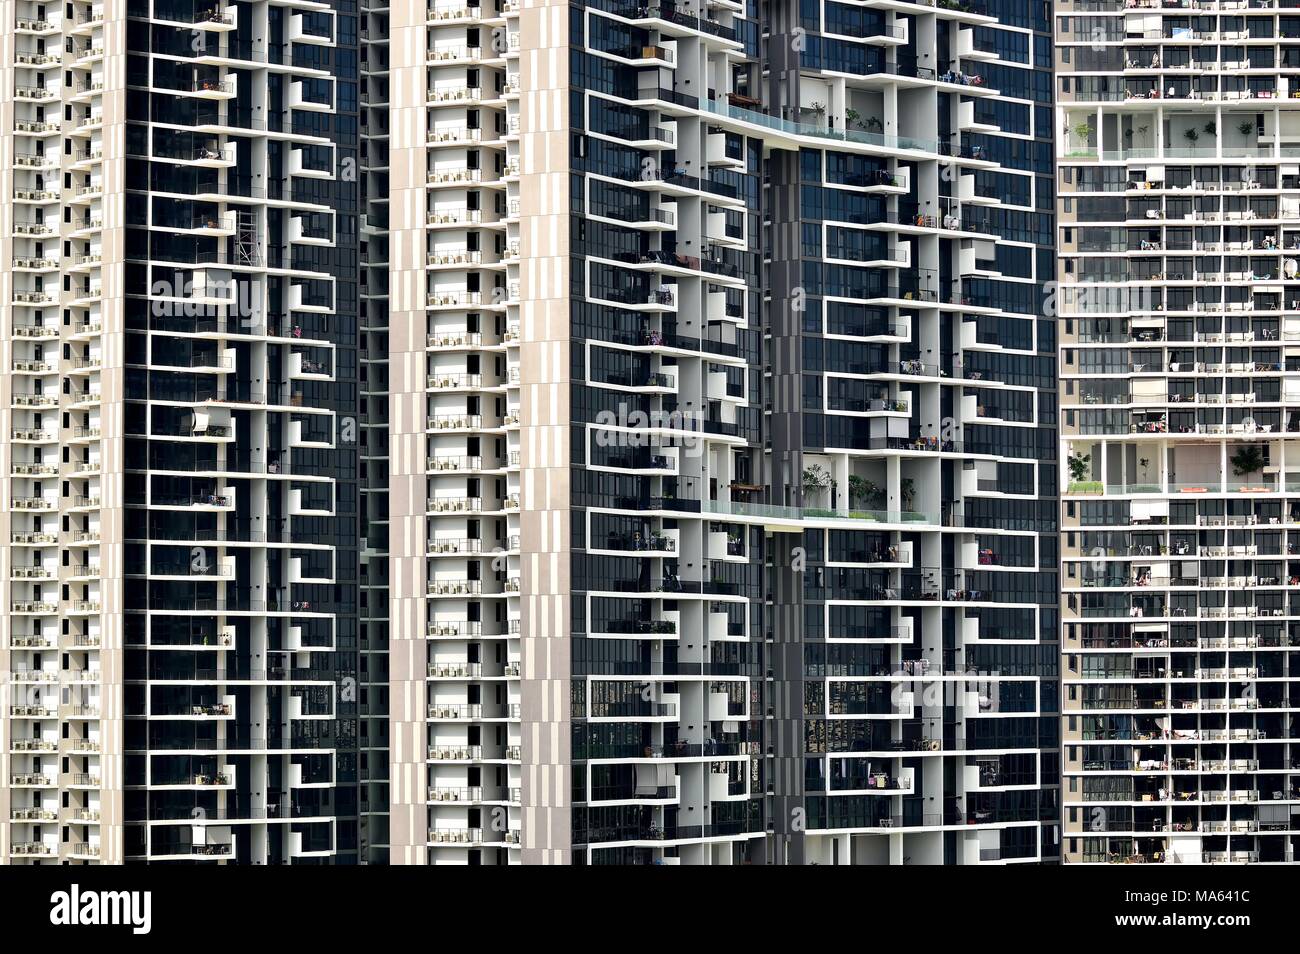 Front view of an enormous modern public housing apartment tower in Singapore with strong detail of design and architectural elements Stock Photo